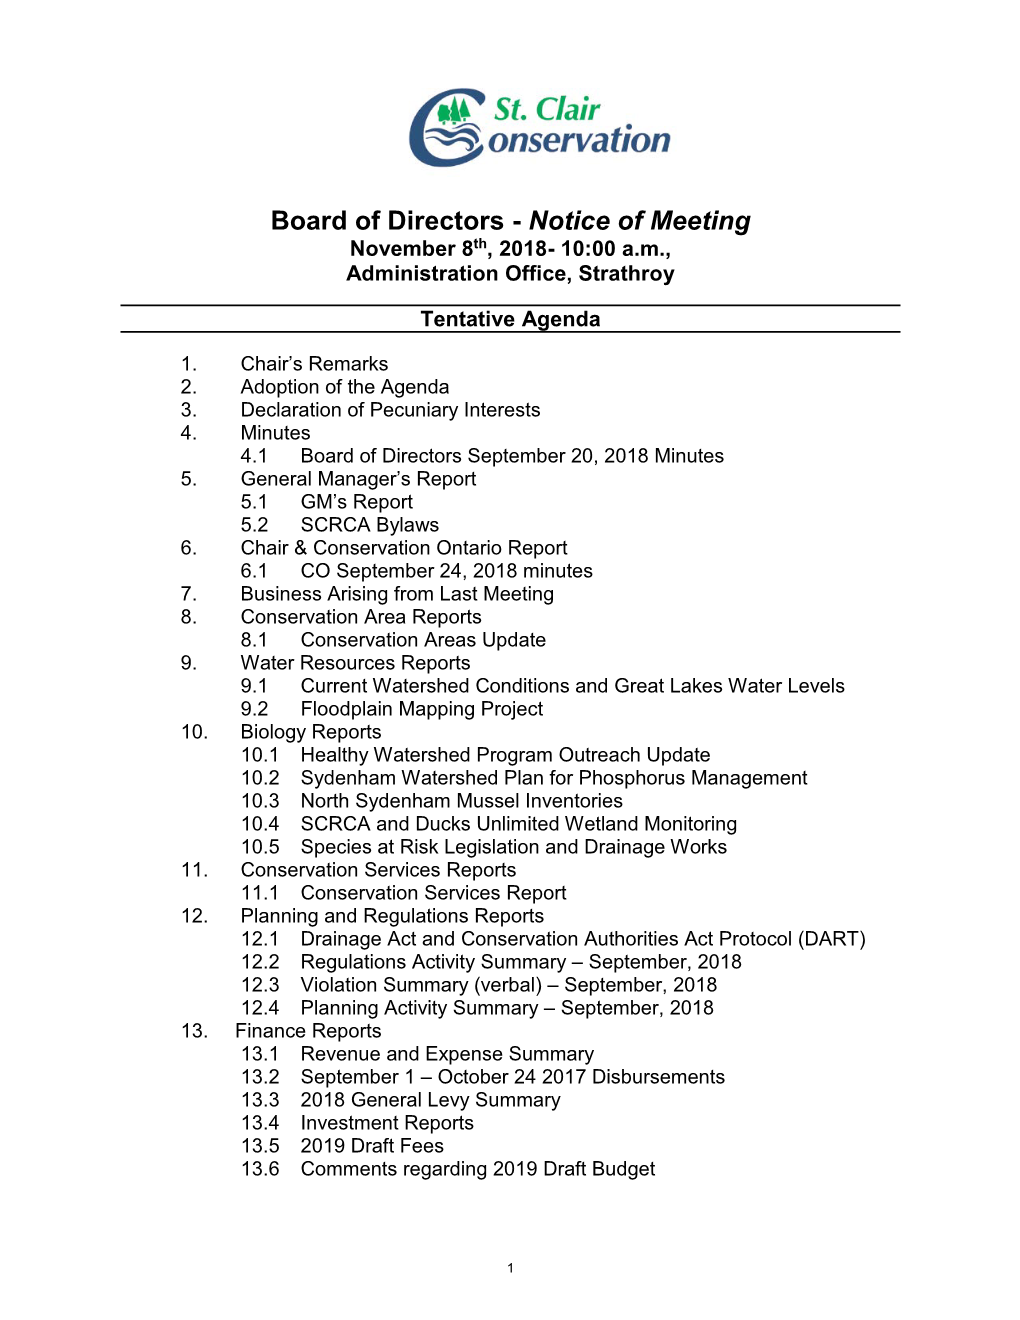 Board of Directors - Notice of Meeting November 8Th, 2018- 10:00 A.M., Administration Office, Strathroy